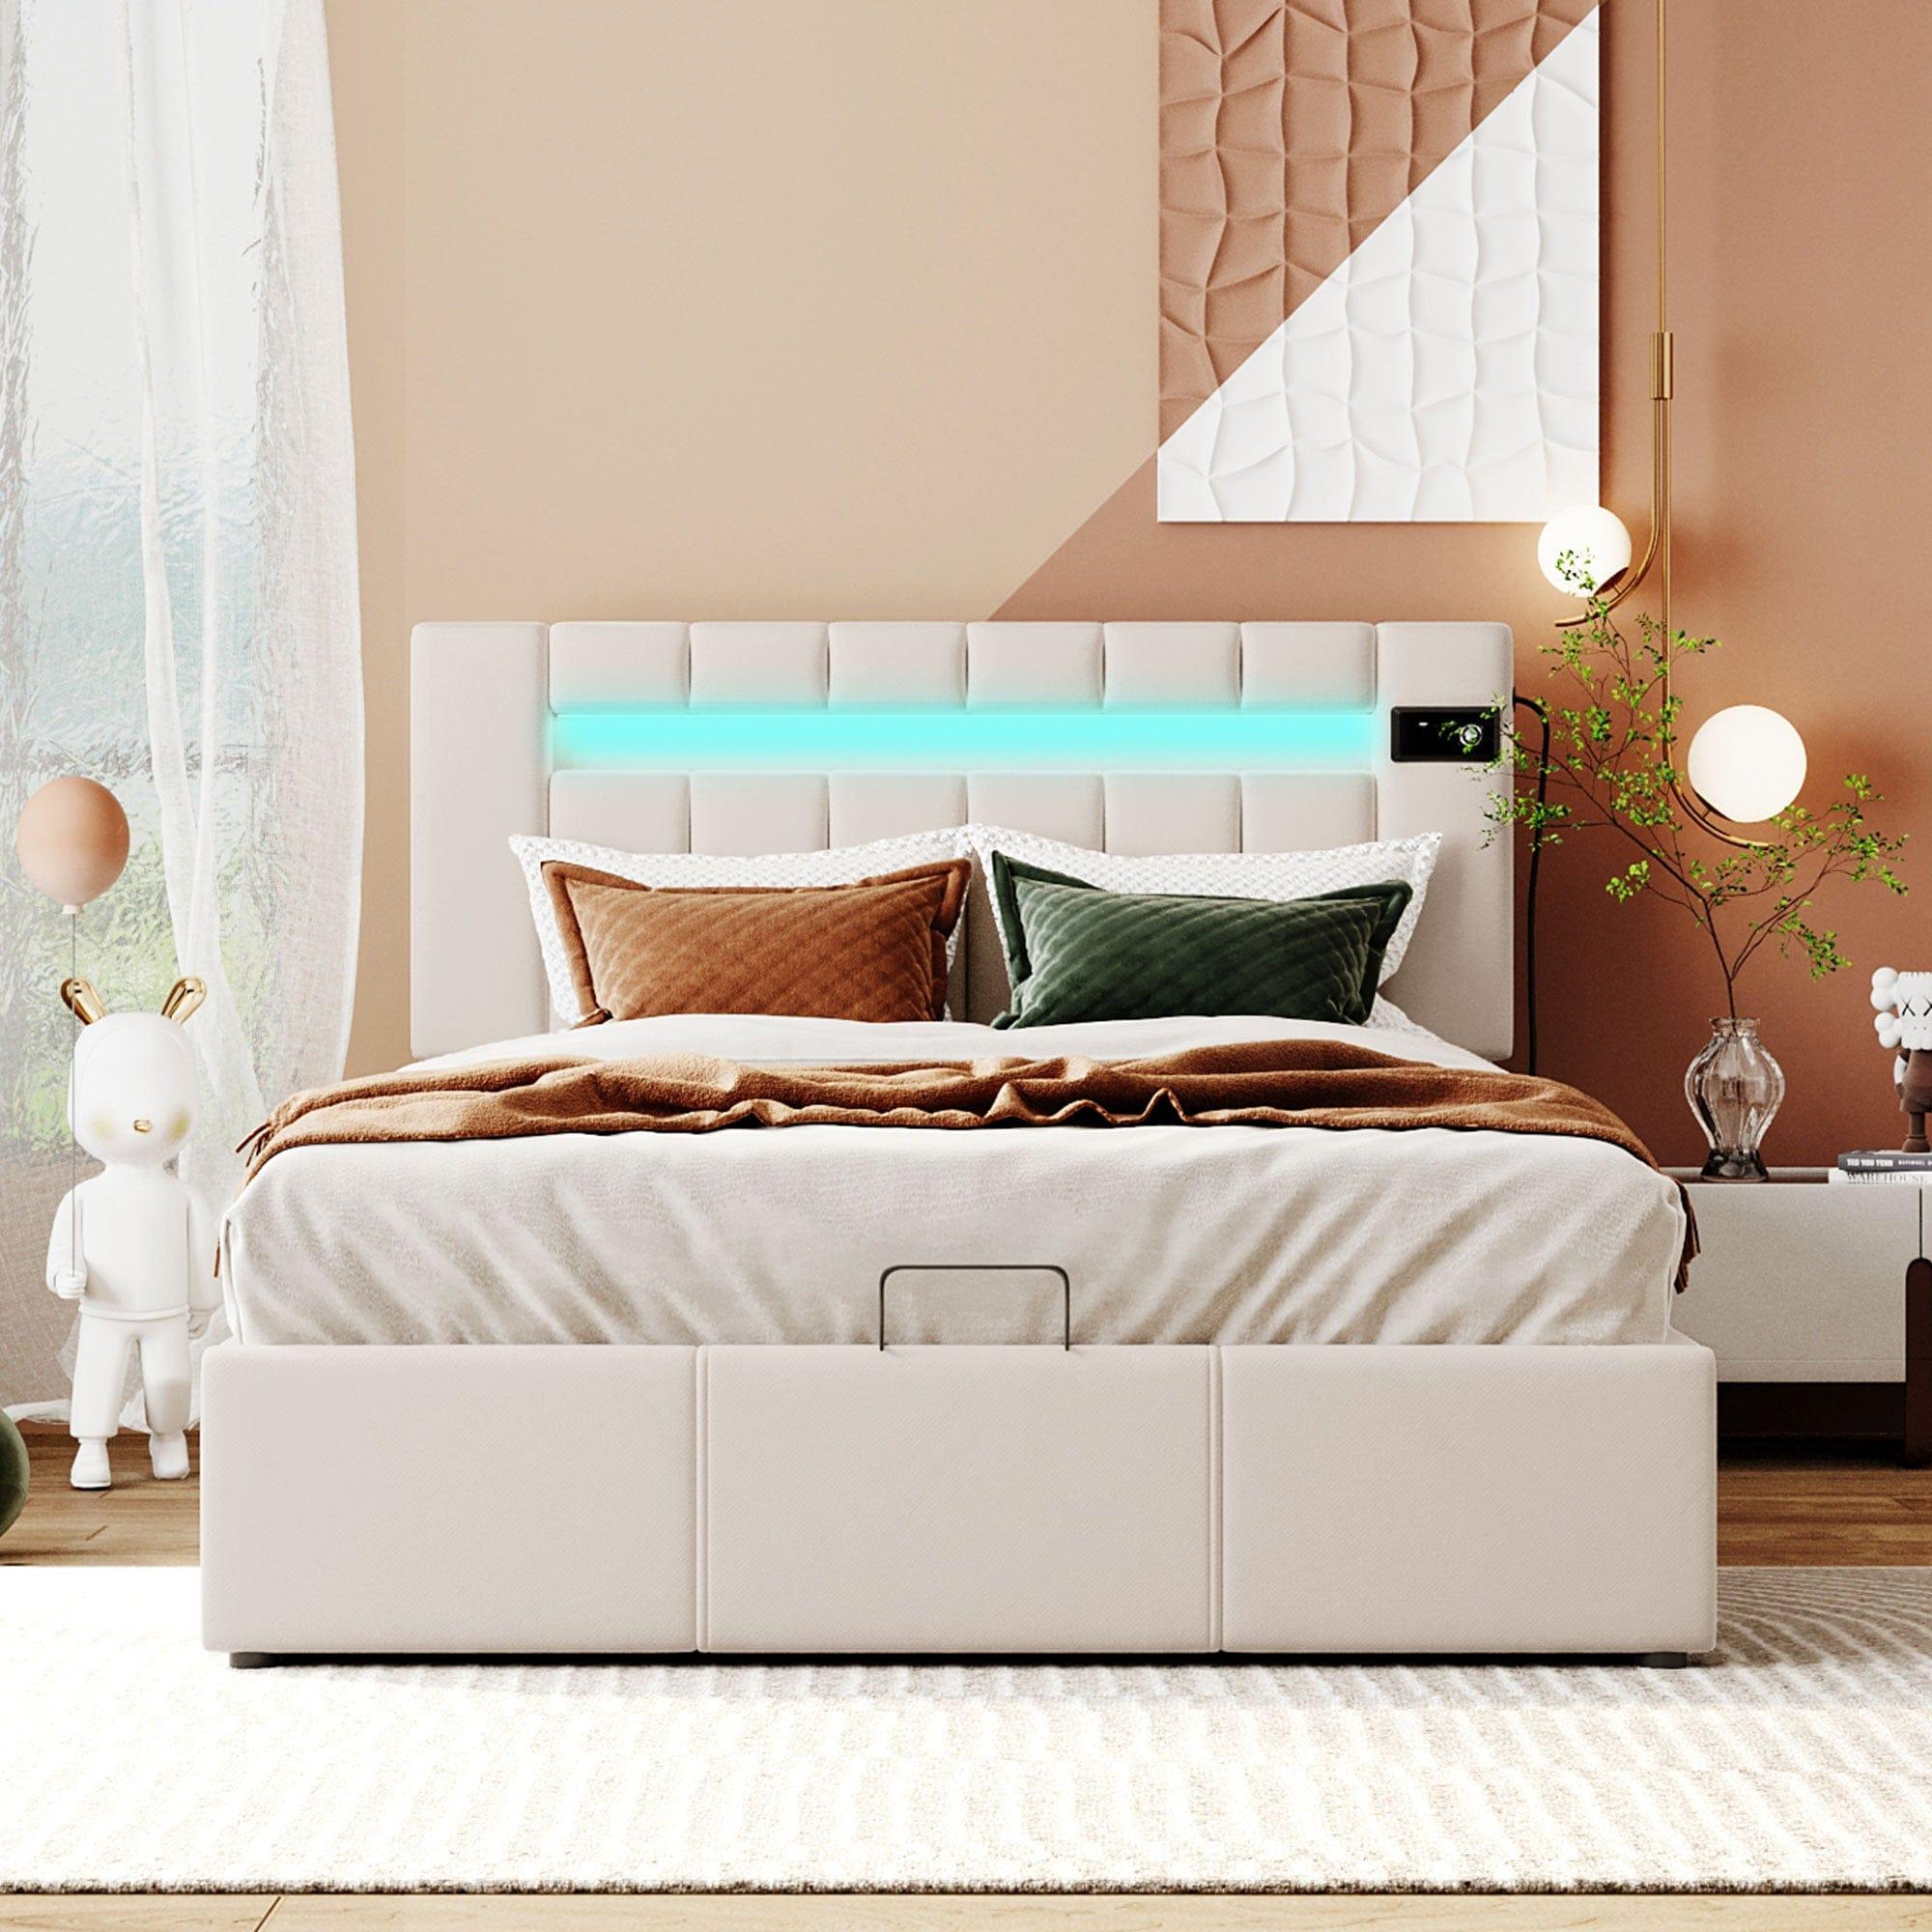 Shop Upholstered Bed Full Size with LED light, Bluetooth Player and USB Charging, Hydraulic Storage Bed in Beige Velvet Fabric Mademoiselle Home Decor